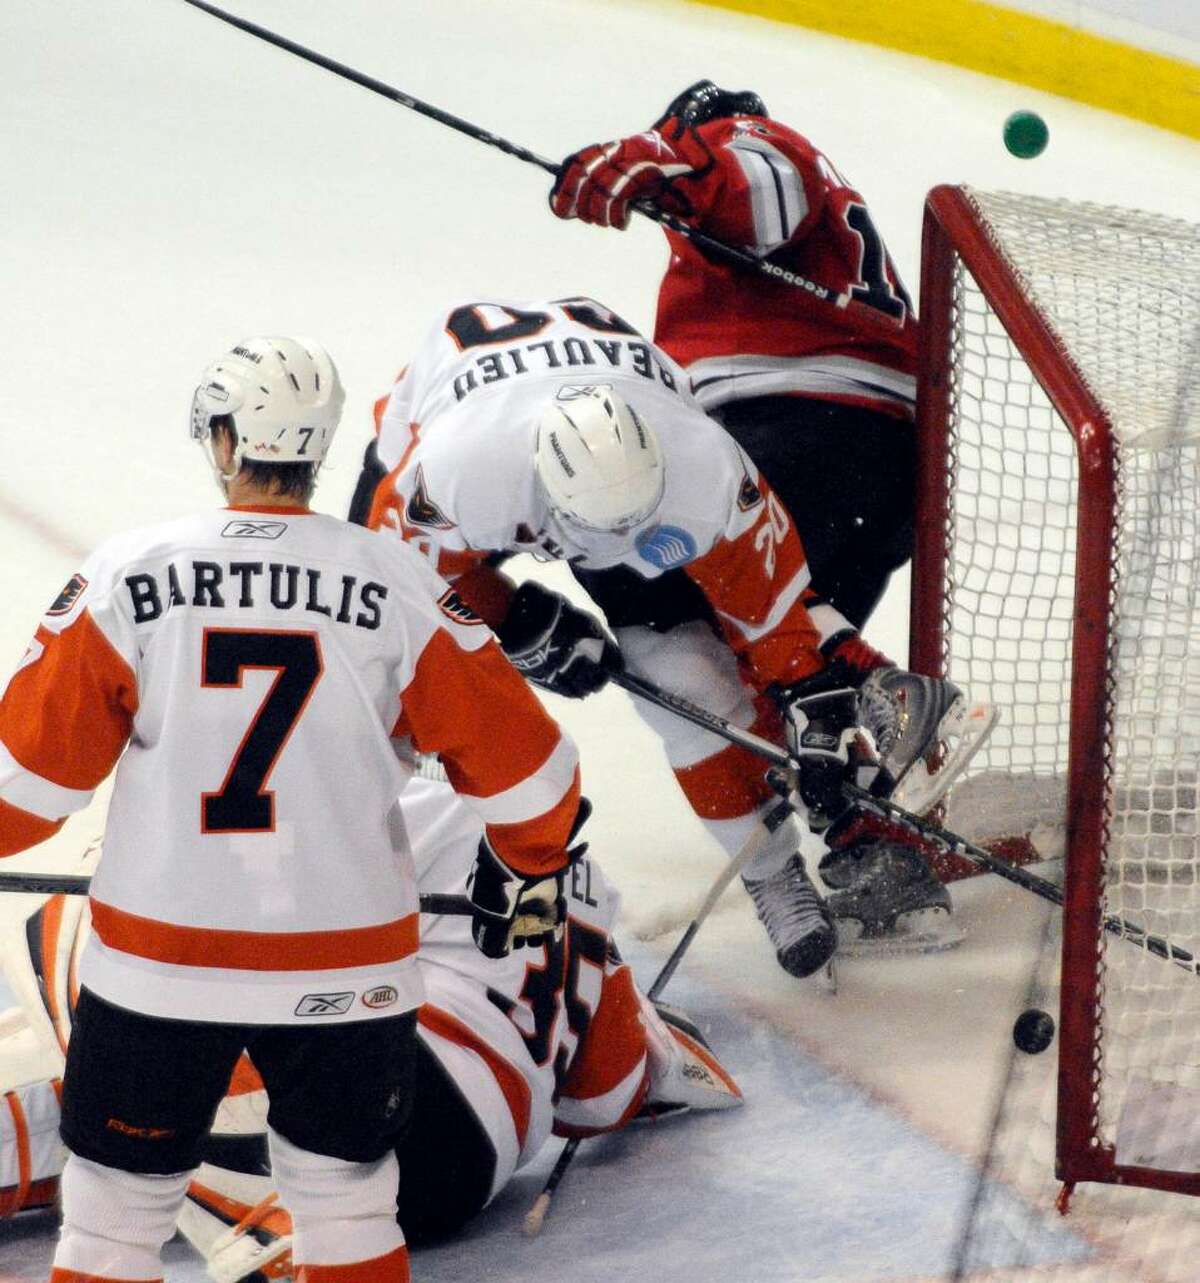 Jacob Micflicker of the River Rats, right, crashes into the goal post after scoring a goal against against the Phantoms. (Hans Pennink/Special to the Times Union)